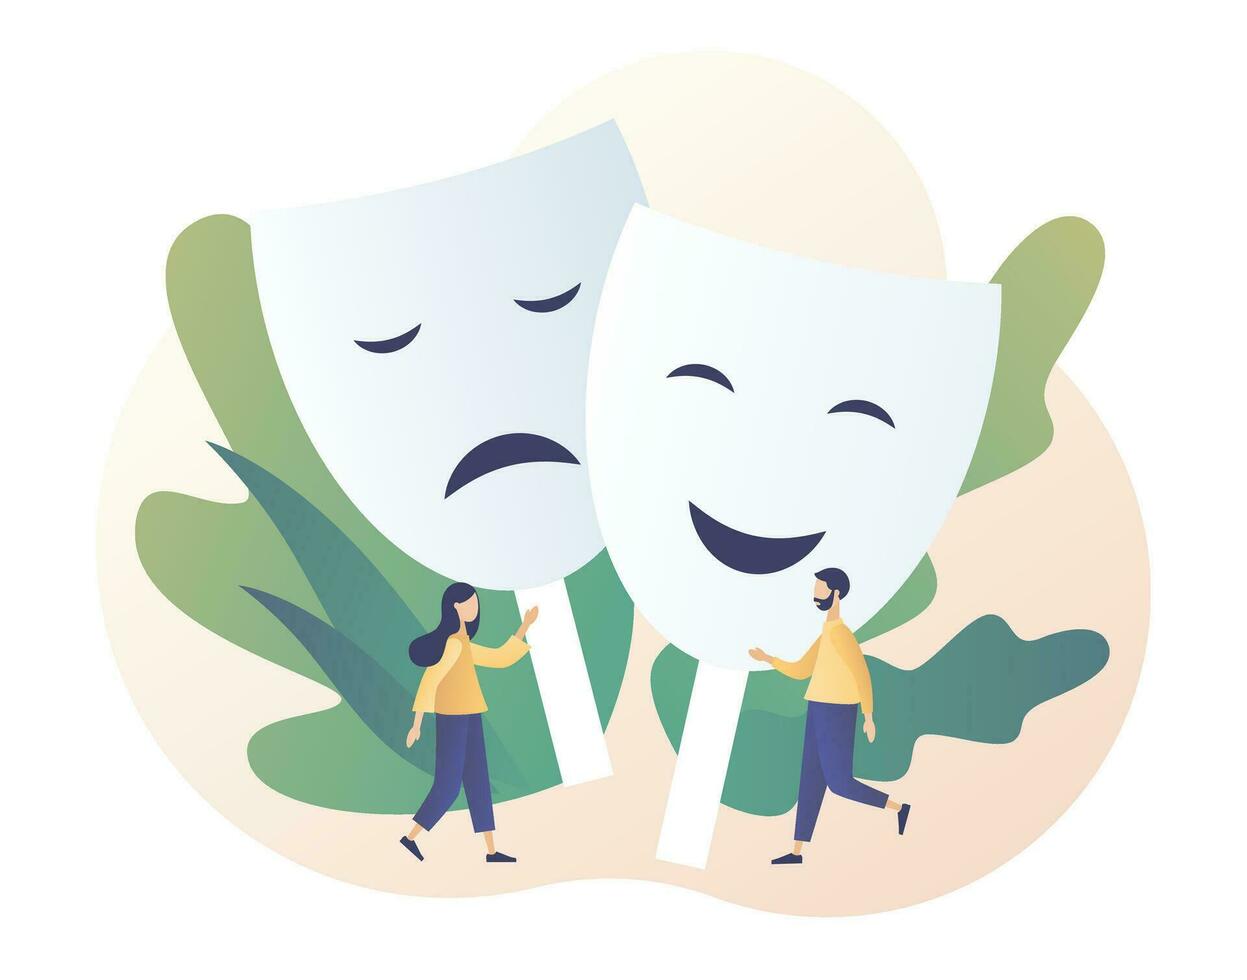 Masking true feelings. Psychology. Human masquerade. Tiny people with big carnival masks with happy or sad expressions. Hypocrisy. Modern flat cartoon style. Vector illustration on white background